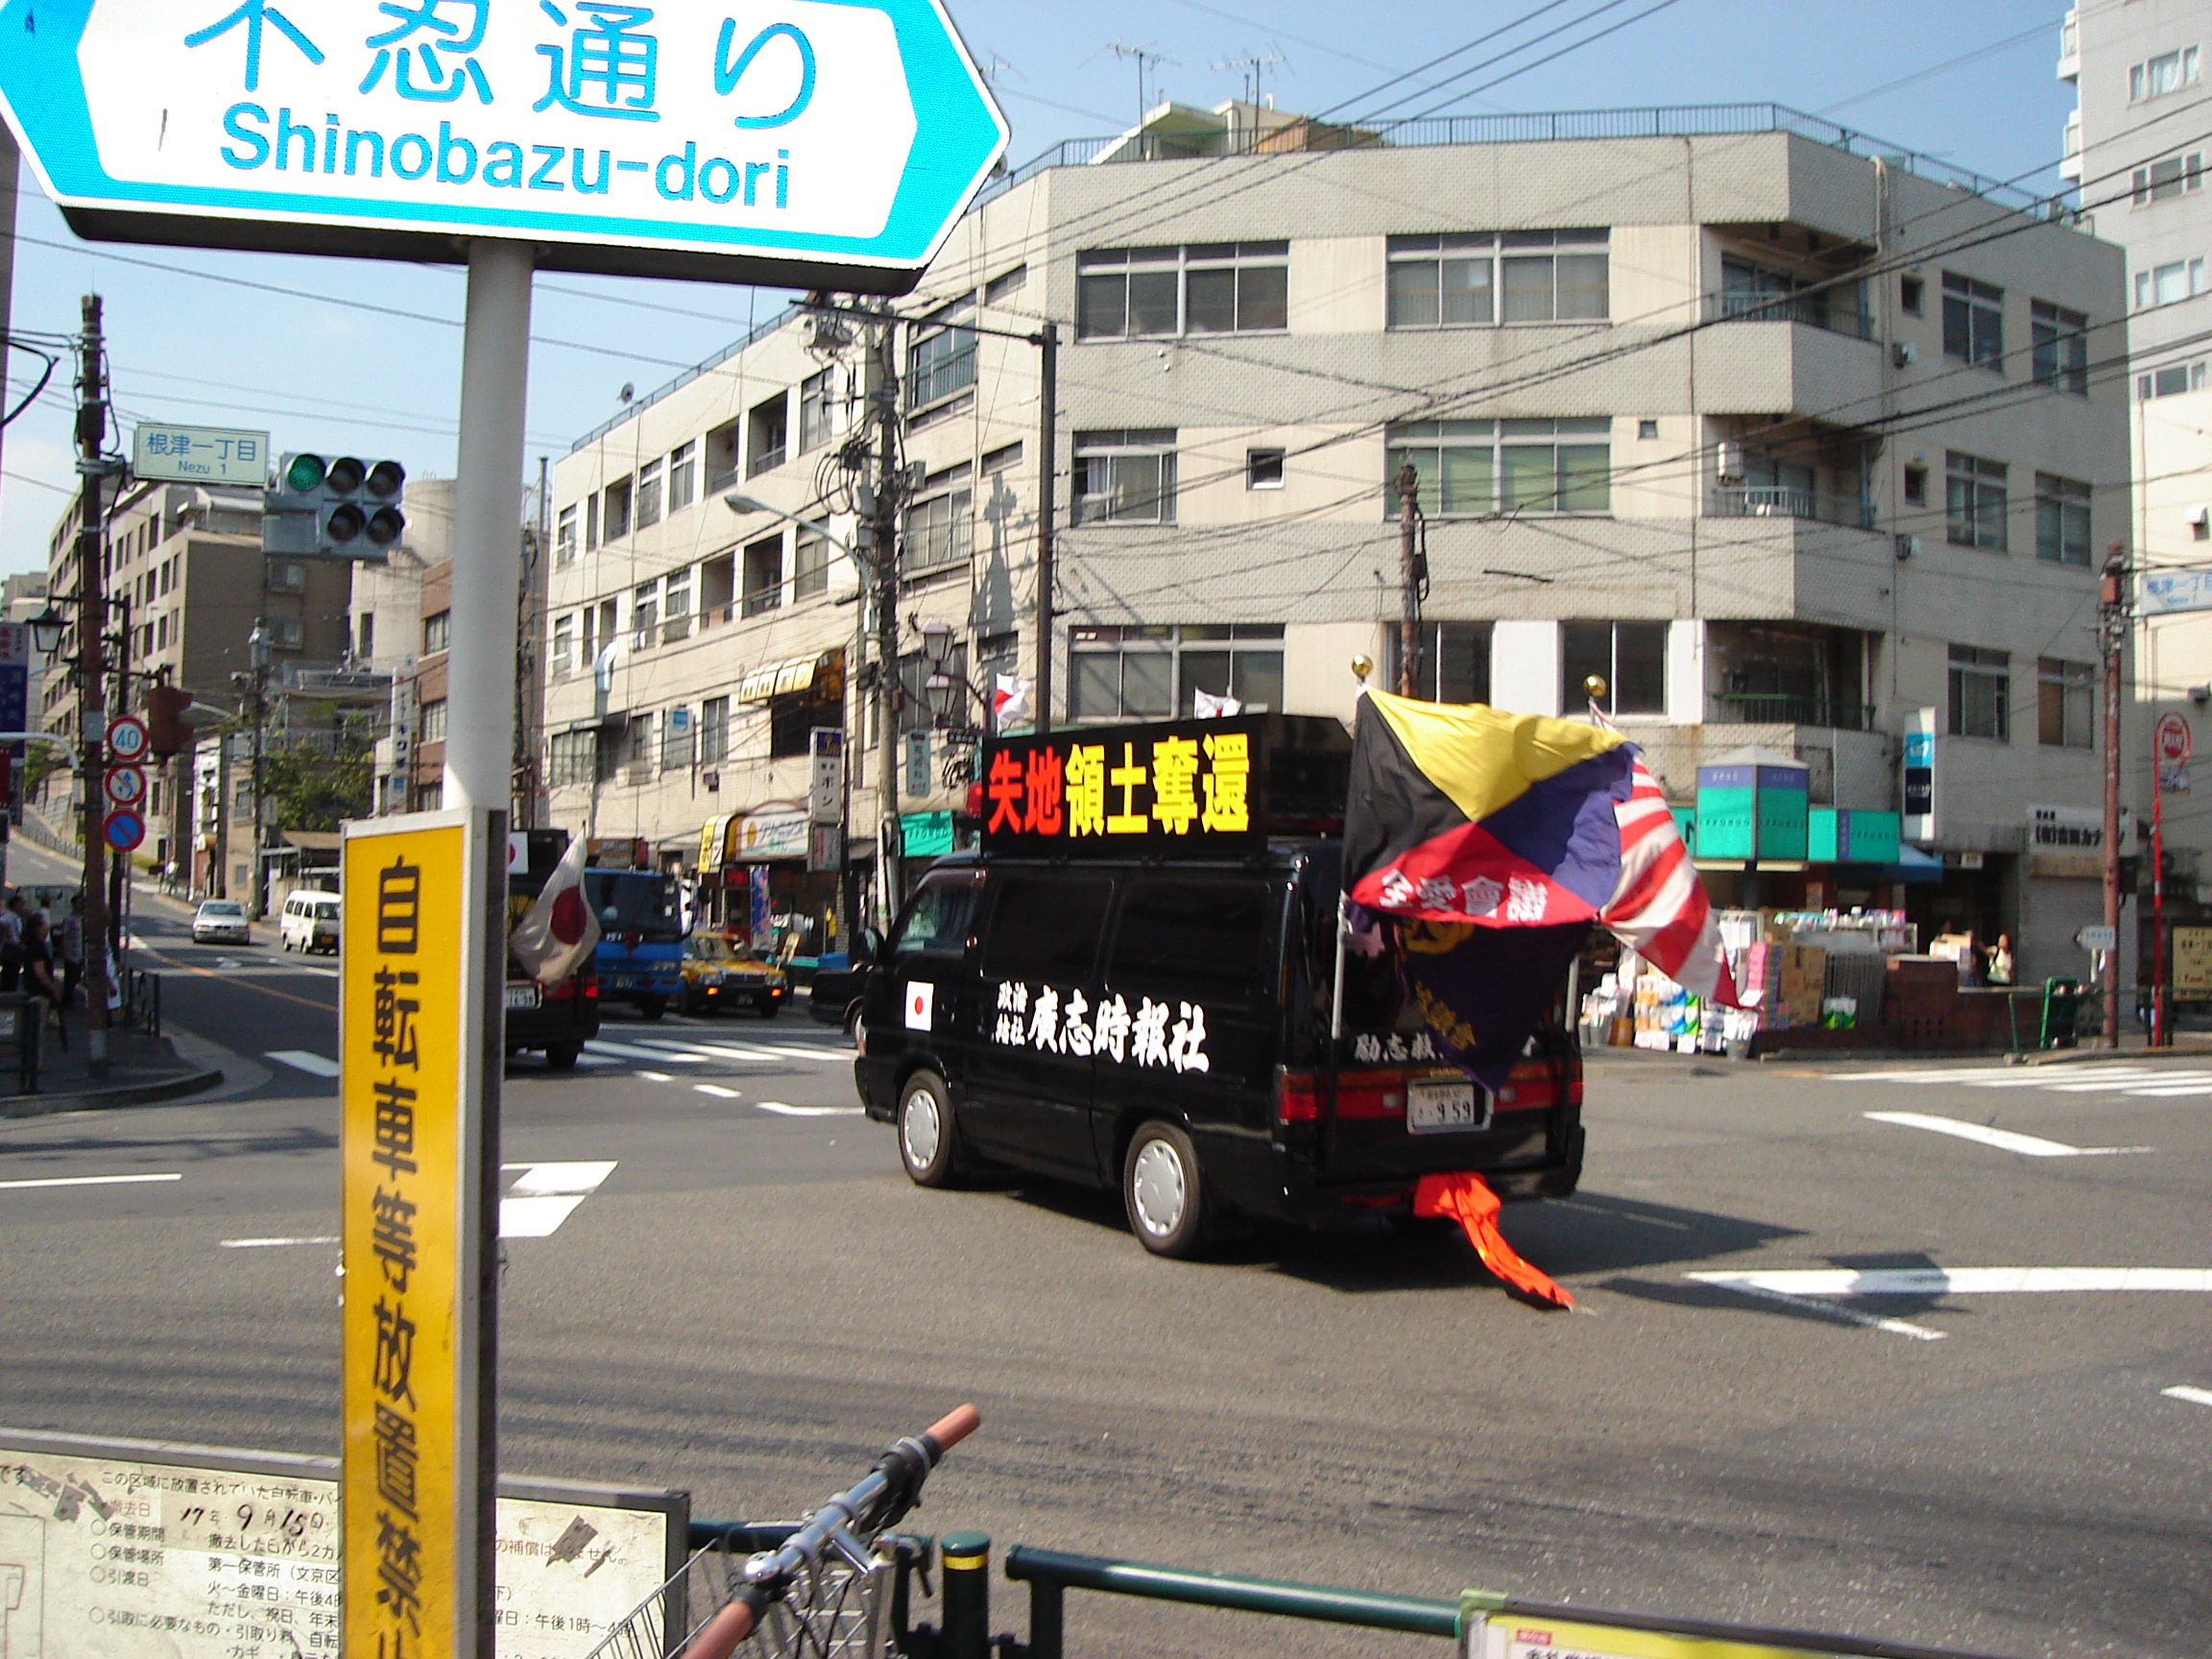 a van with election slogans and banners on it